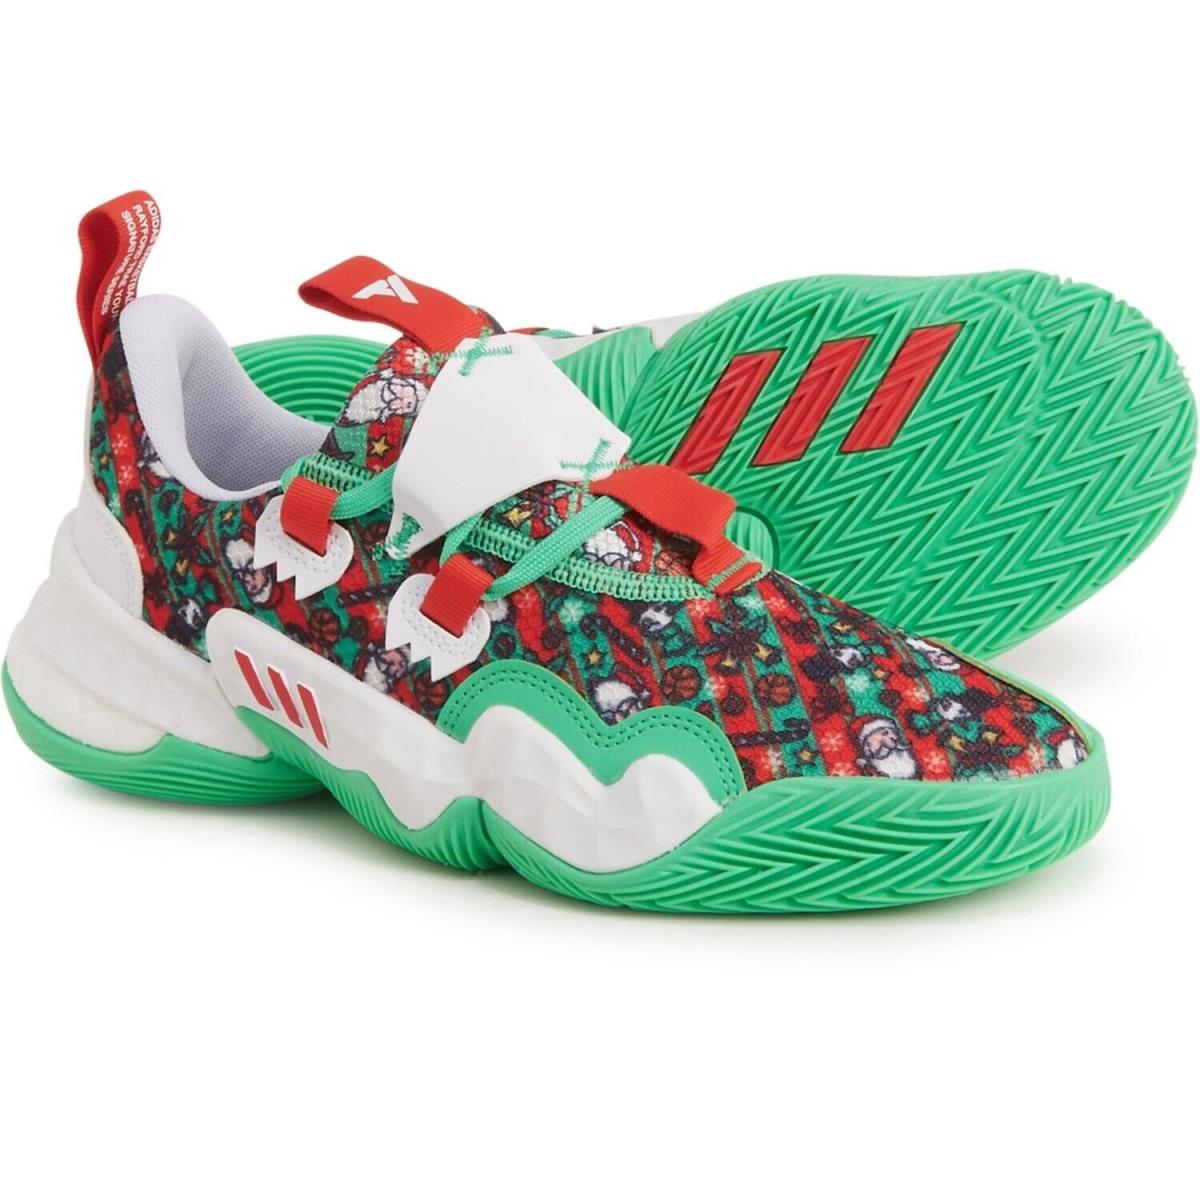 Adidas Trae Young 1 Shoes Men Sz 5 / Women Sz 6 Green Red White Christmas GY0305